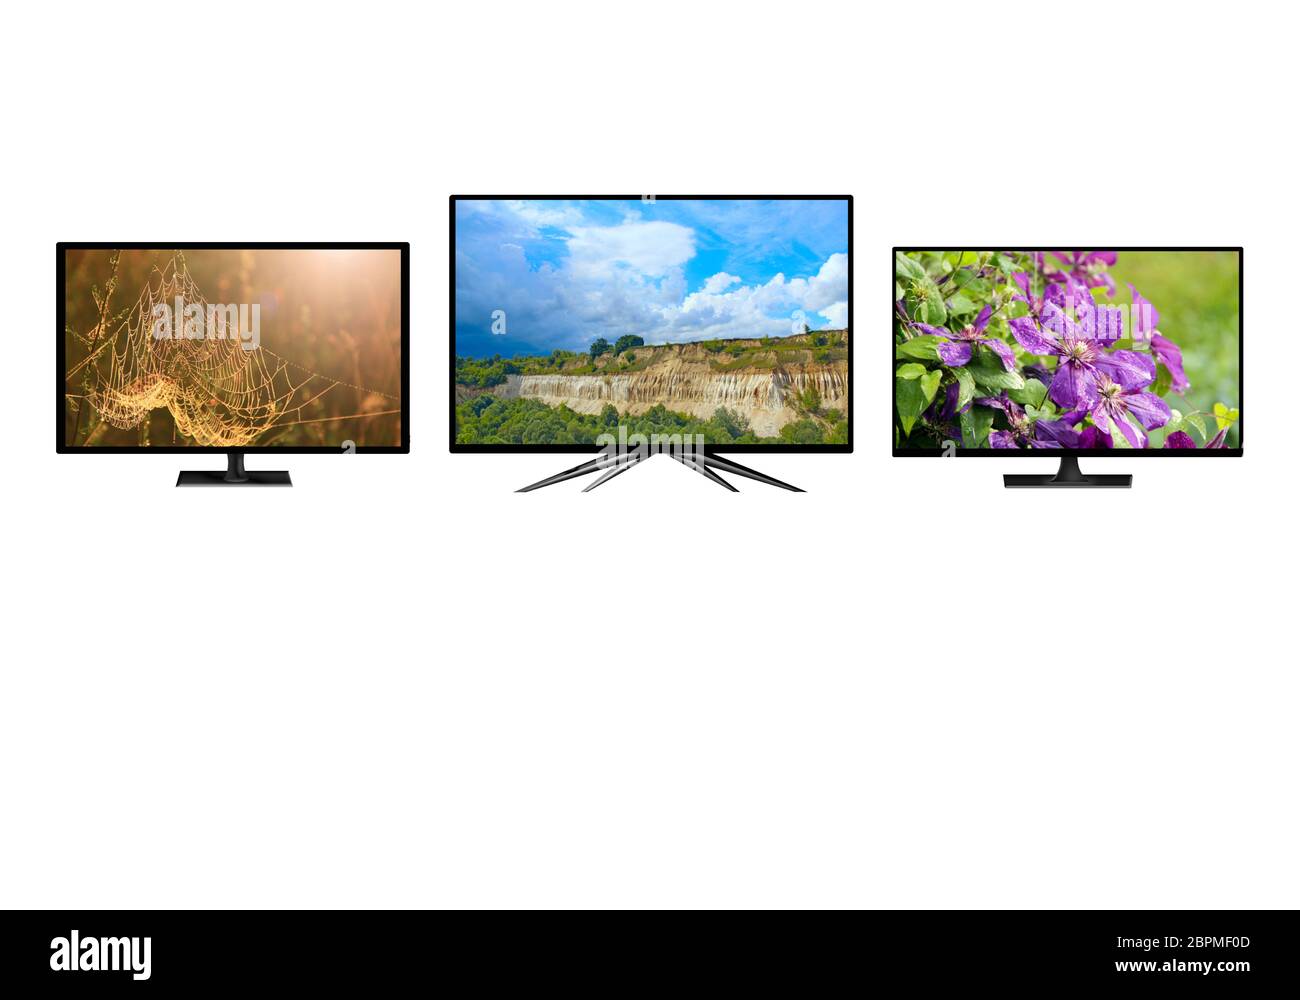 Television monitors isolated on white background. TV monitors showing ...